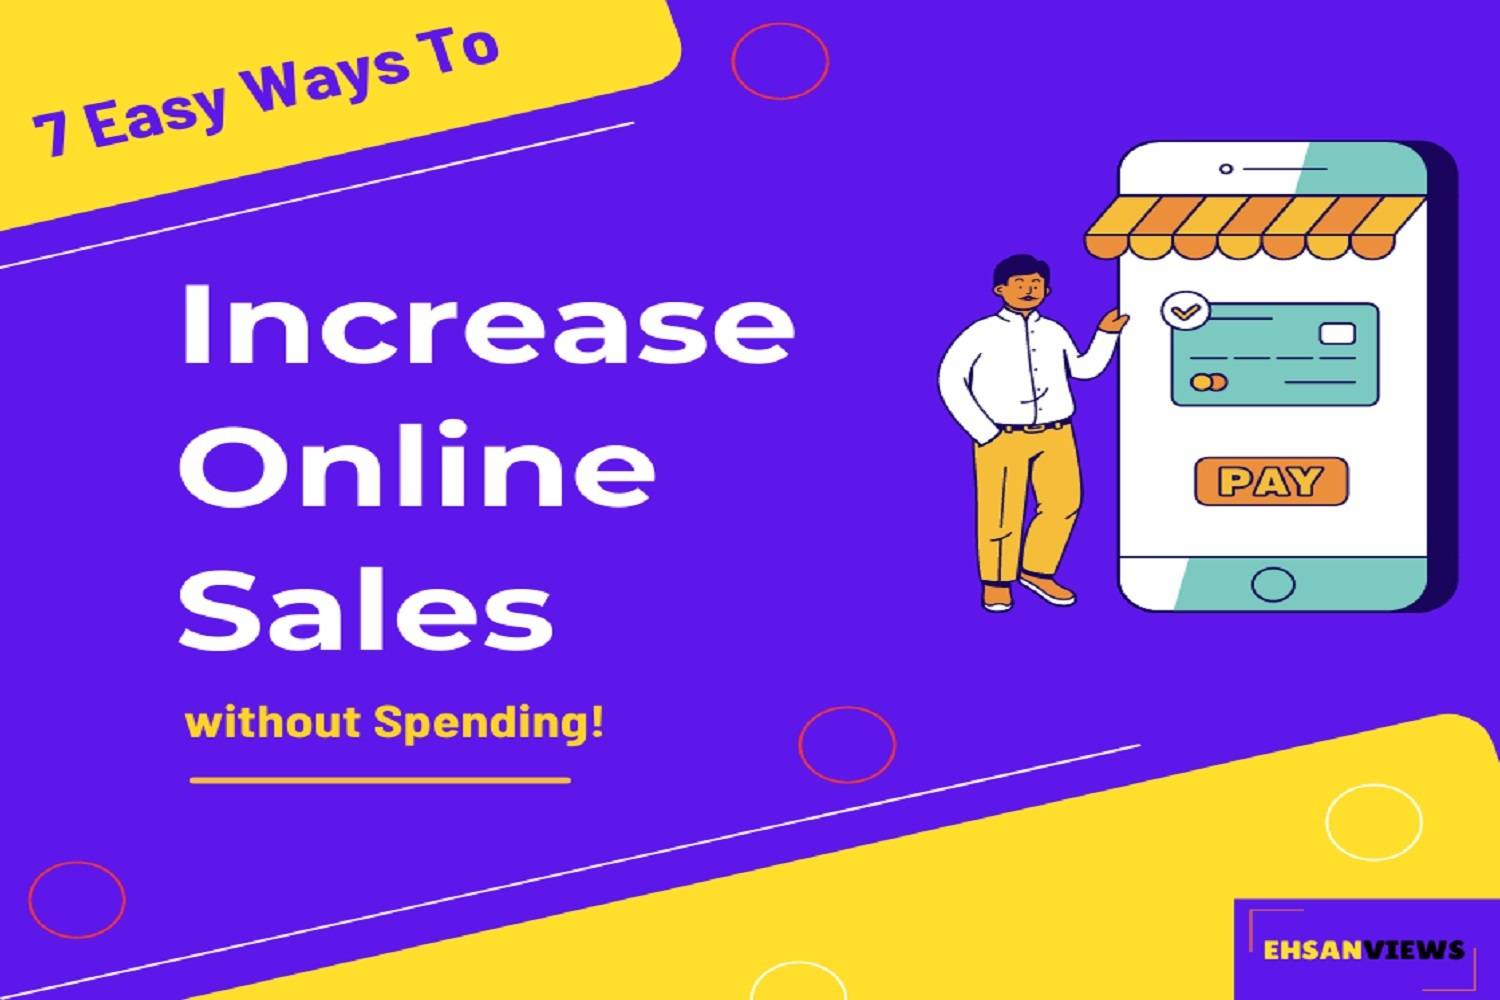 7 Easy Ways To Increase Online Sales Without Spending! | Abdul Ehsan | Entrepreneur and Digital Marketing Consultant in Sri Lanka